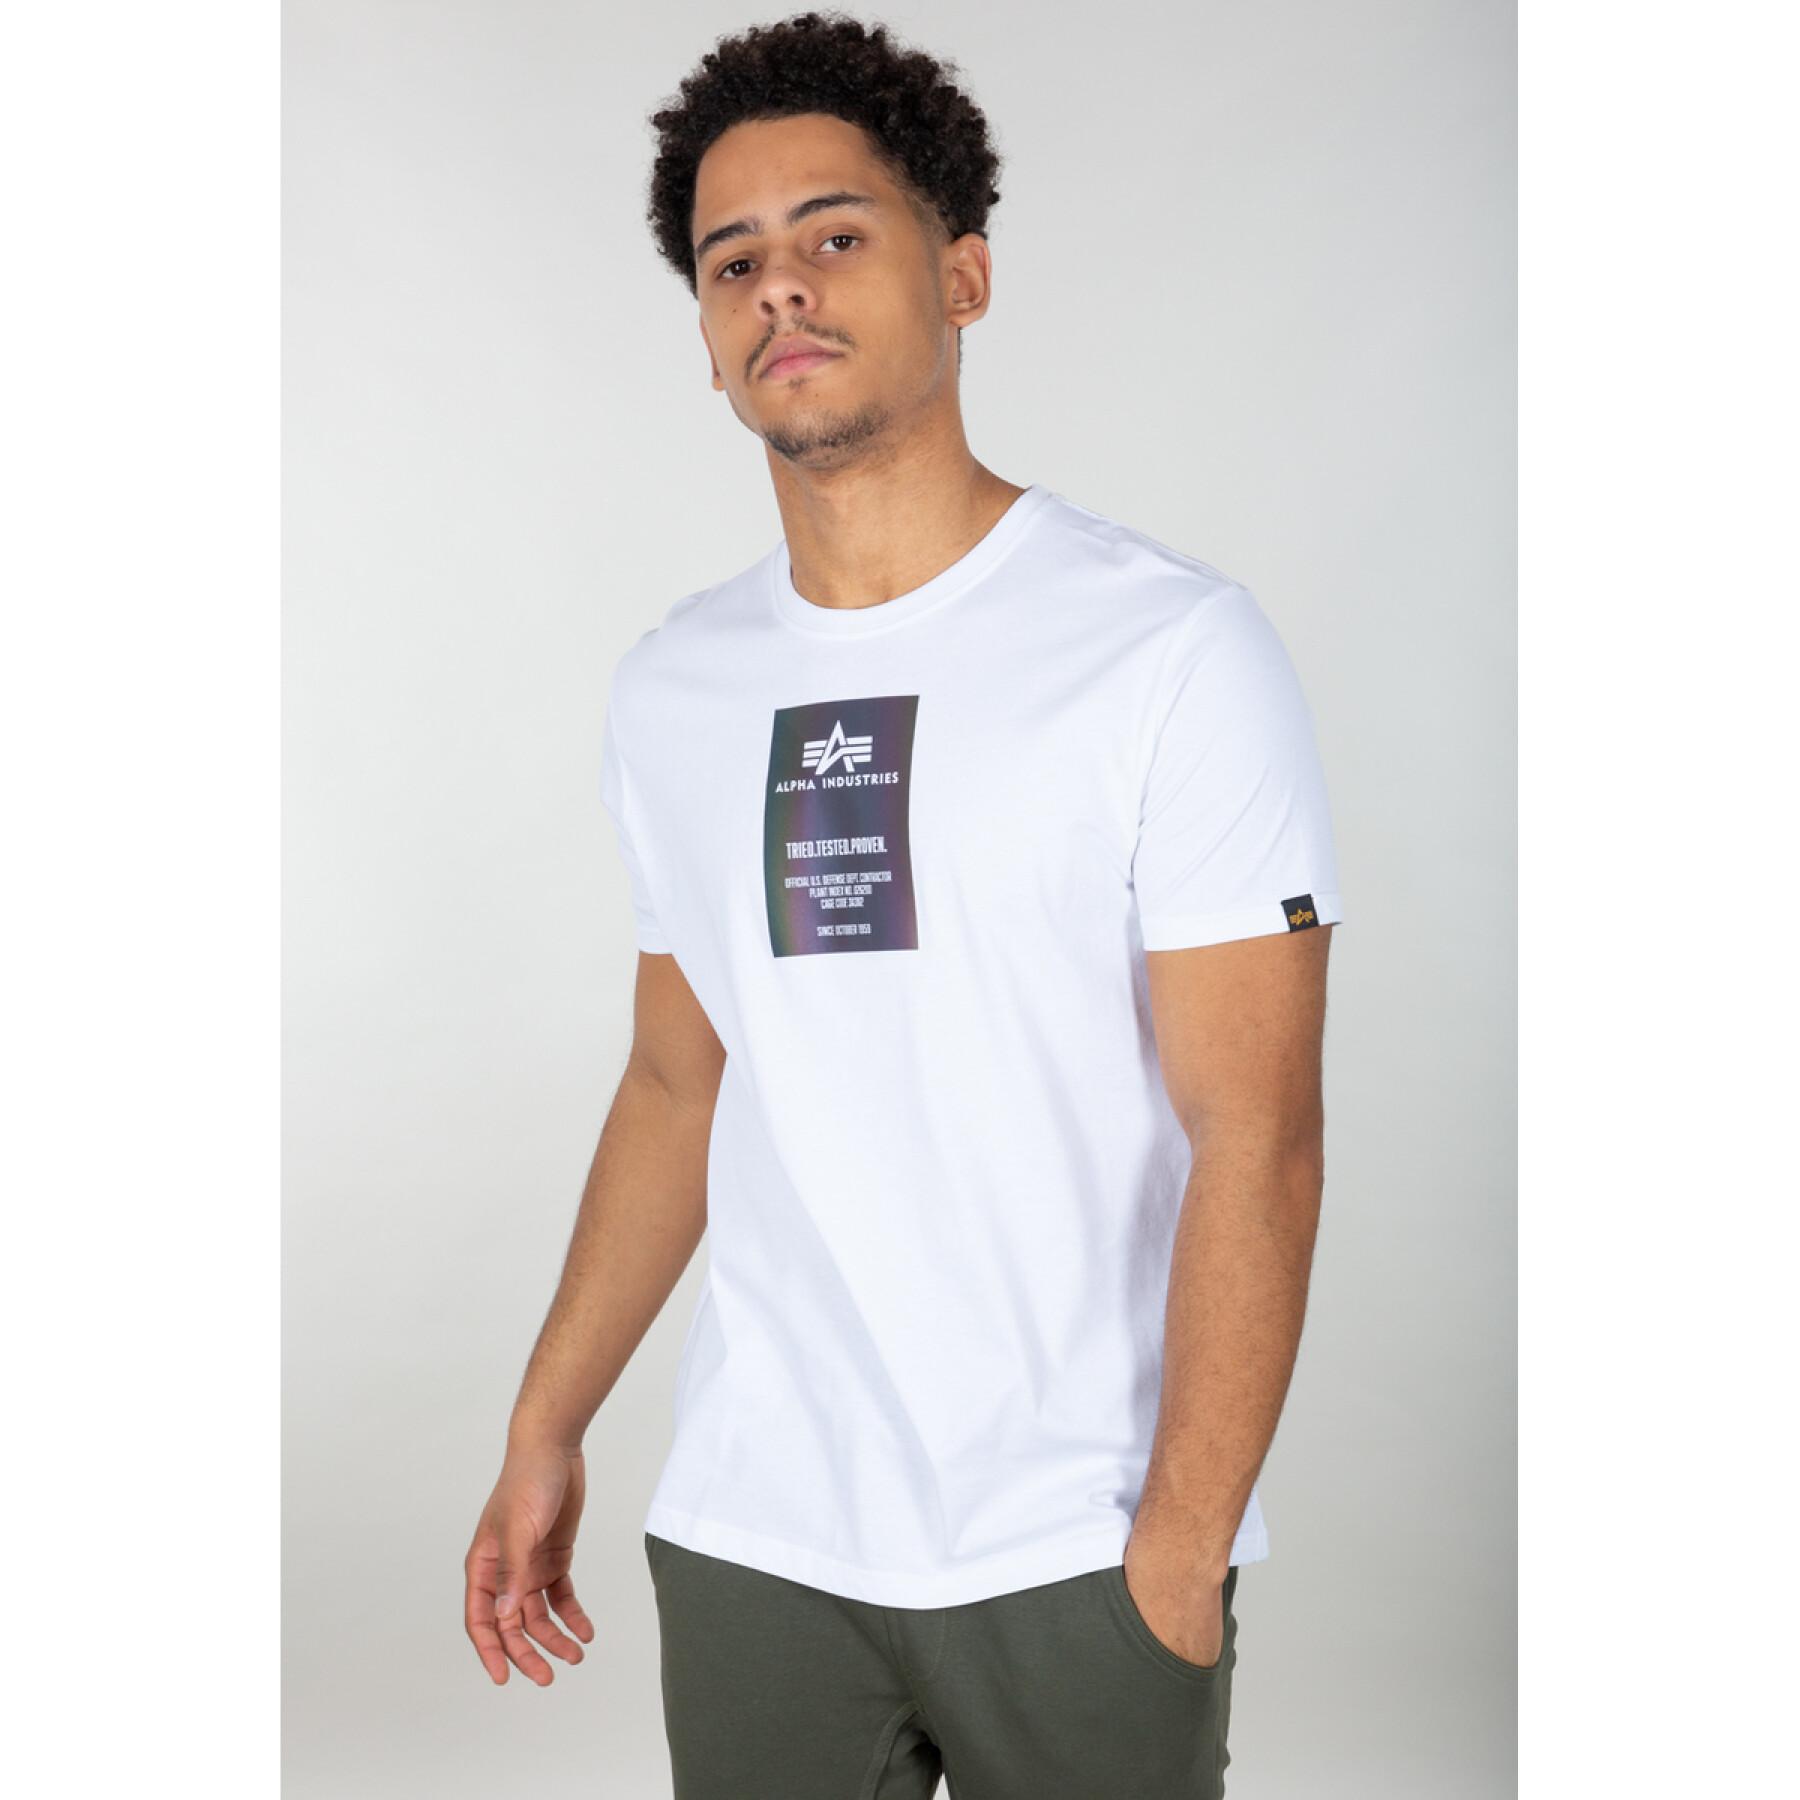 Lifestyle - Polo Reflective T-shirt - T-shirts Industries Label shirts Man - and Rainbow Alpha